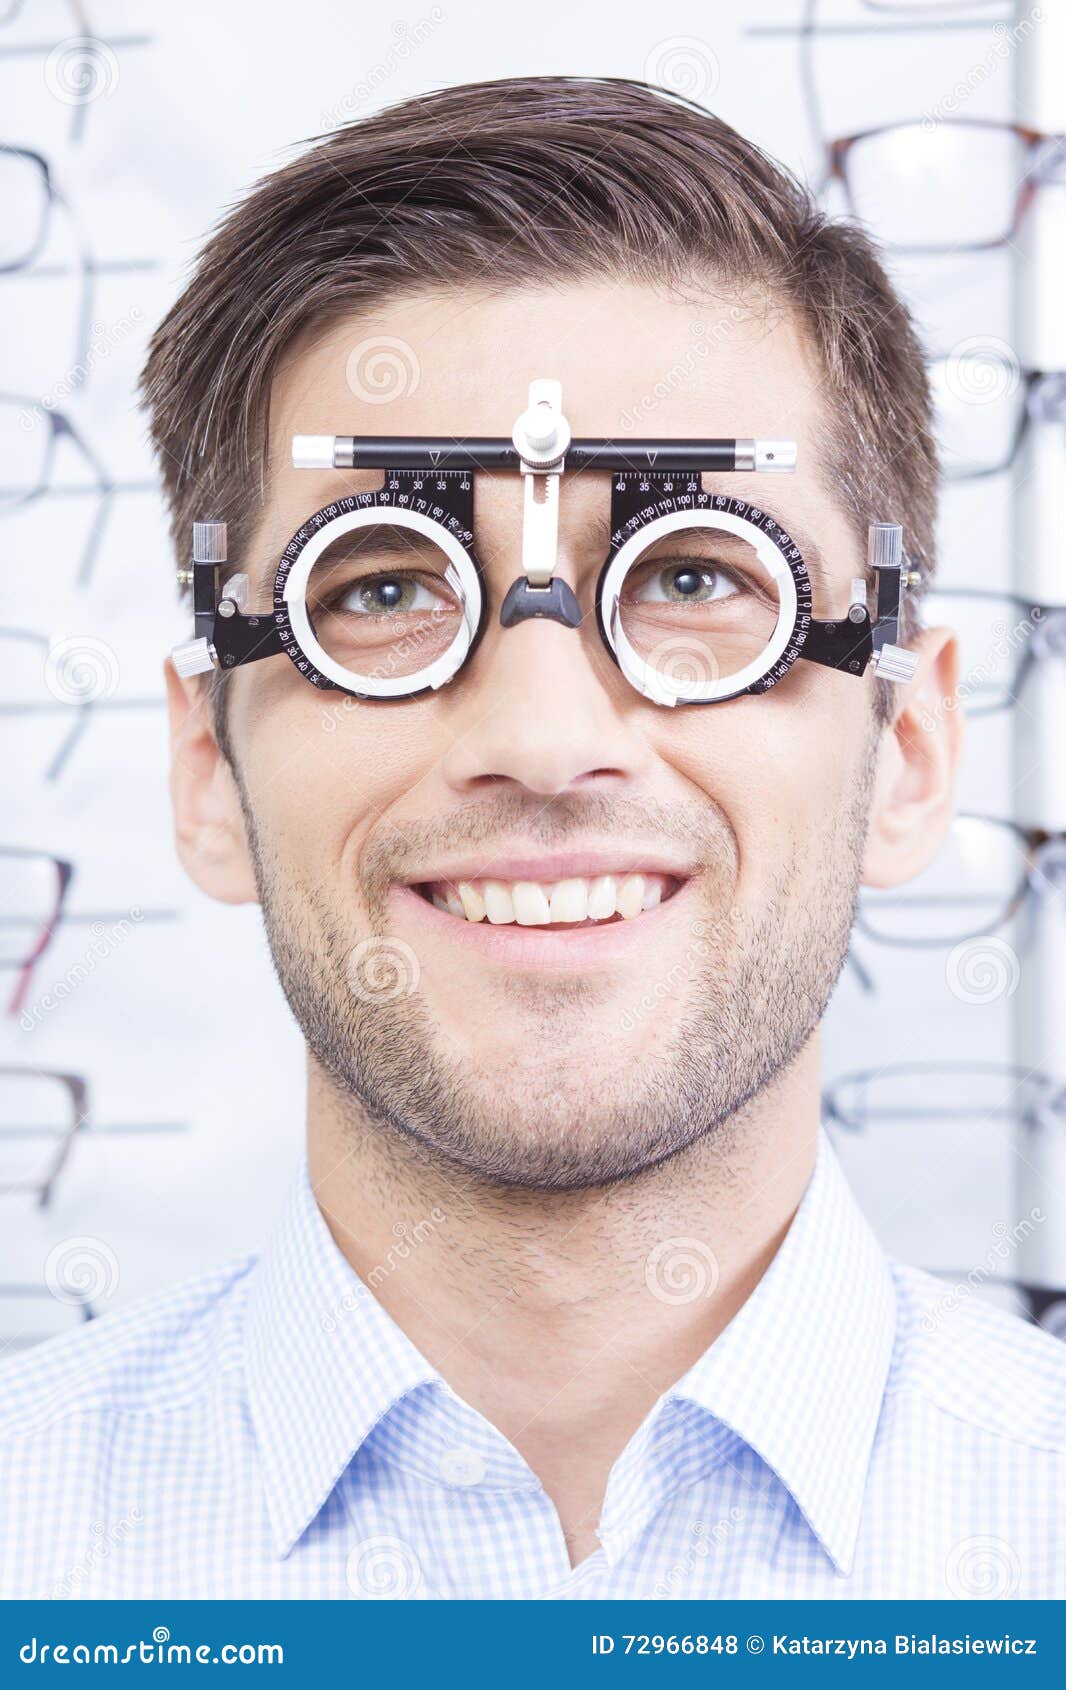 Can you see properly? stock photo. Image of optic, fashion - 72966848